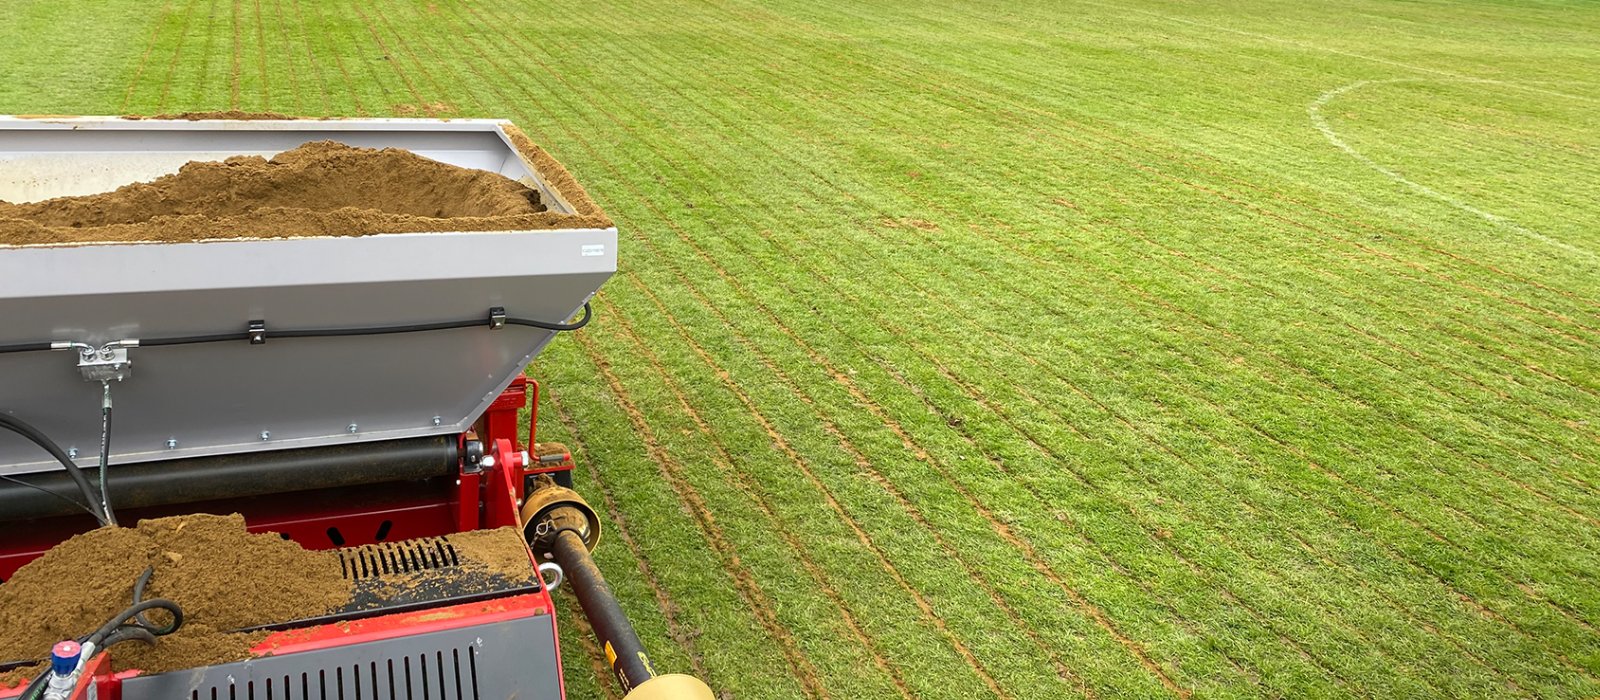 Football Pitch Renovation Contractor